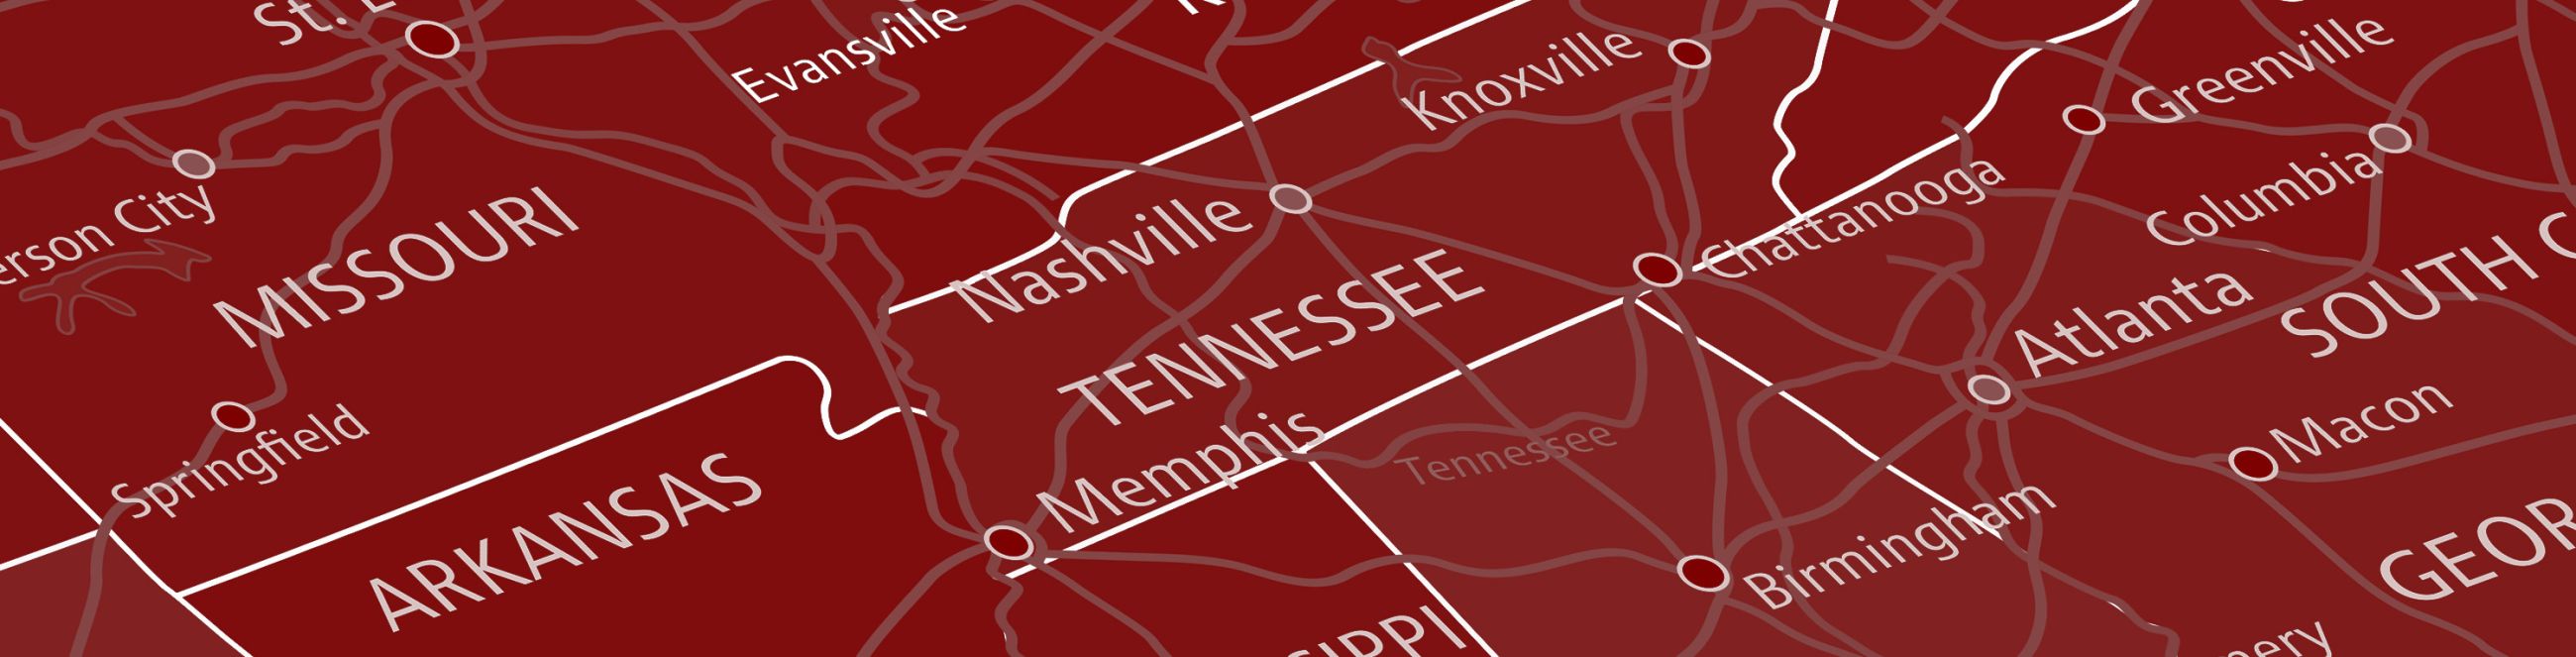 Delta 9 Tennessee Facts & Is Delta 9 Legal in Tennessee?